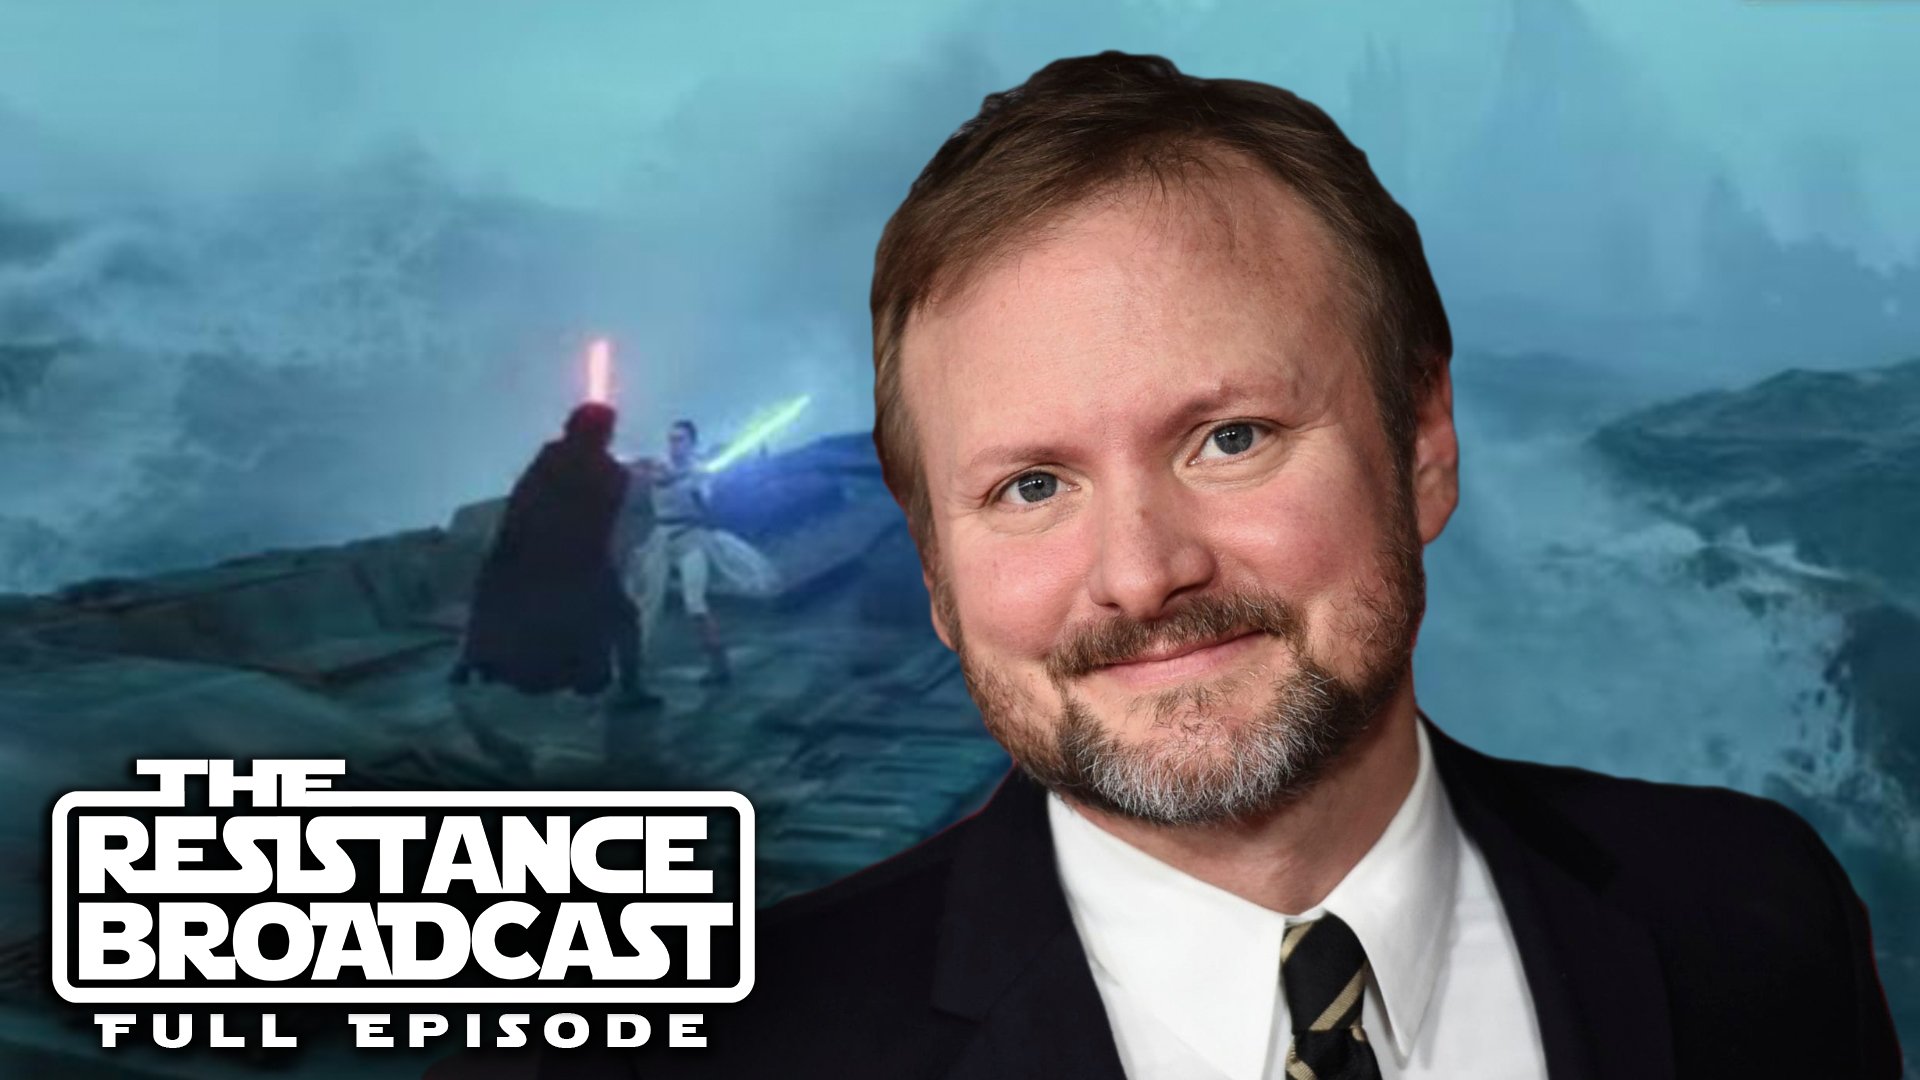 Star Wars: Rian Johnson Shares Reaction To The Rise Of Skywalker